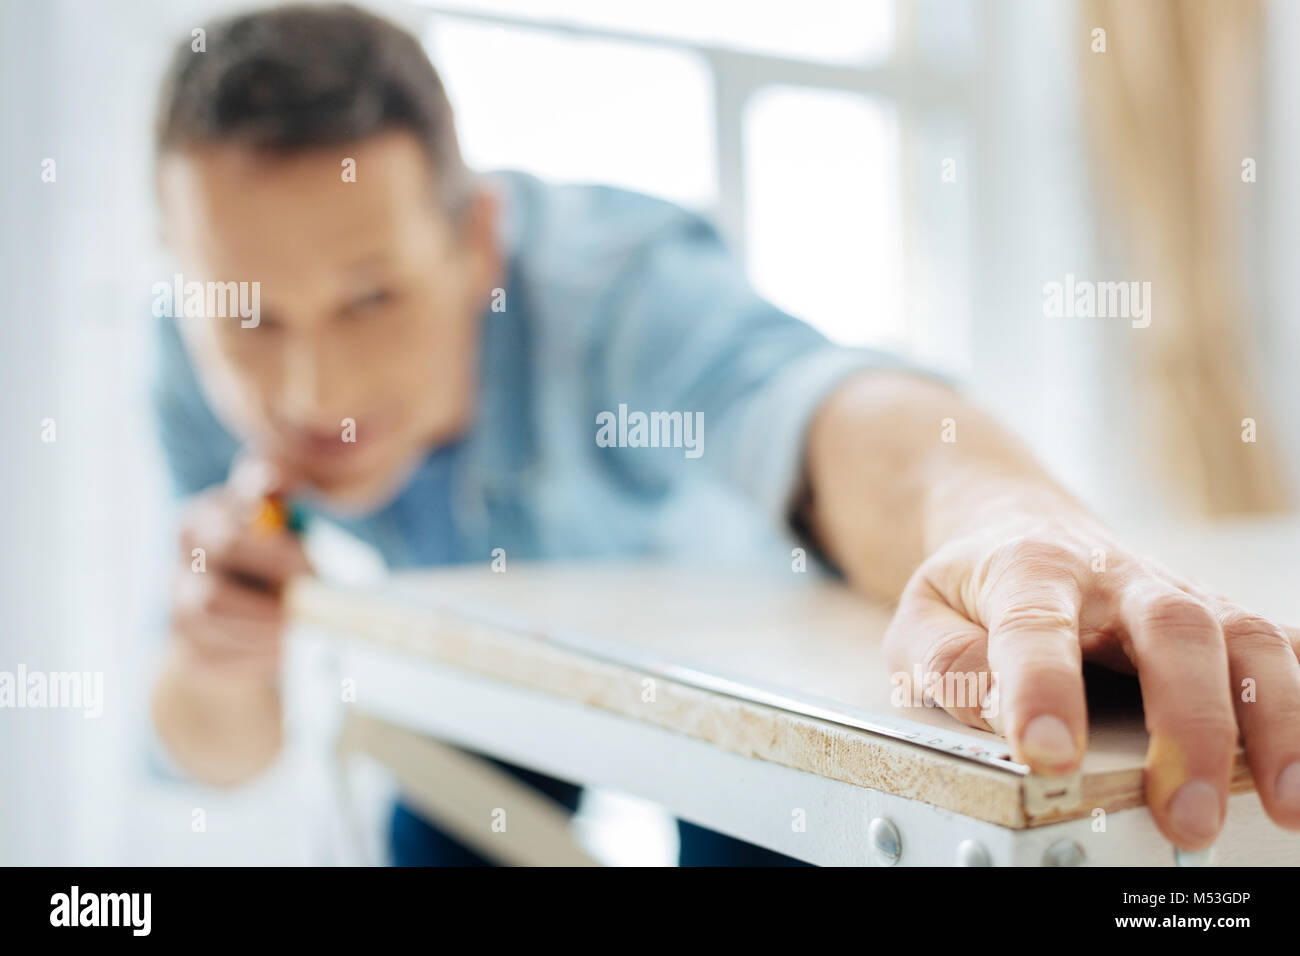 Close up of young man using a tape measure Stock Photo